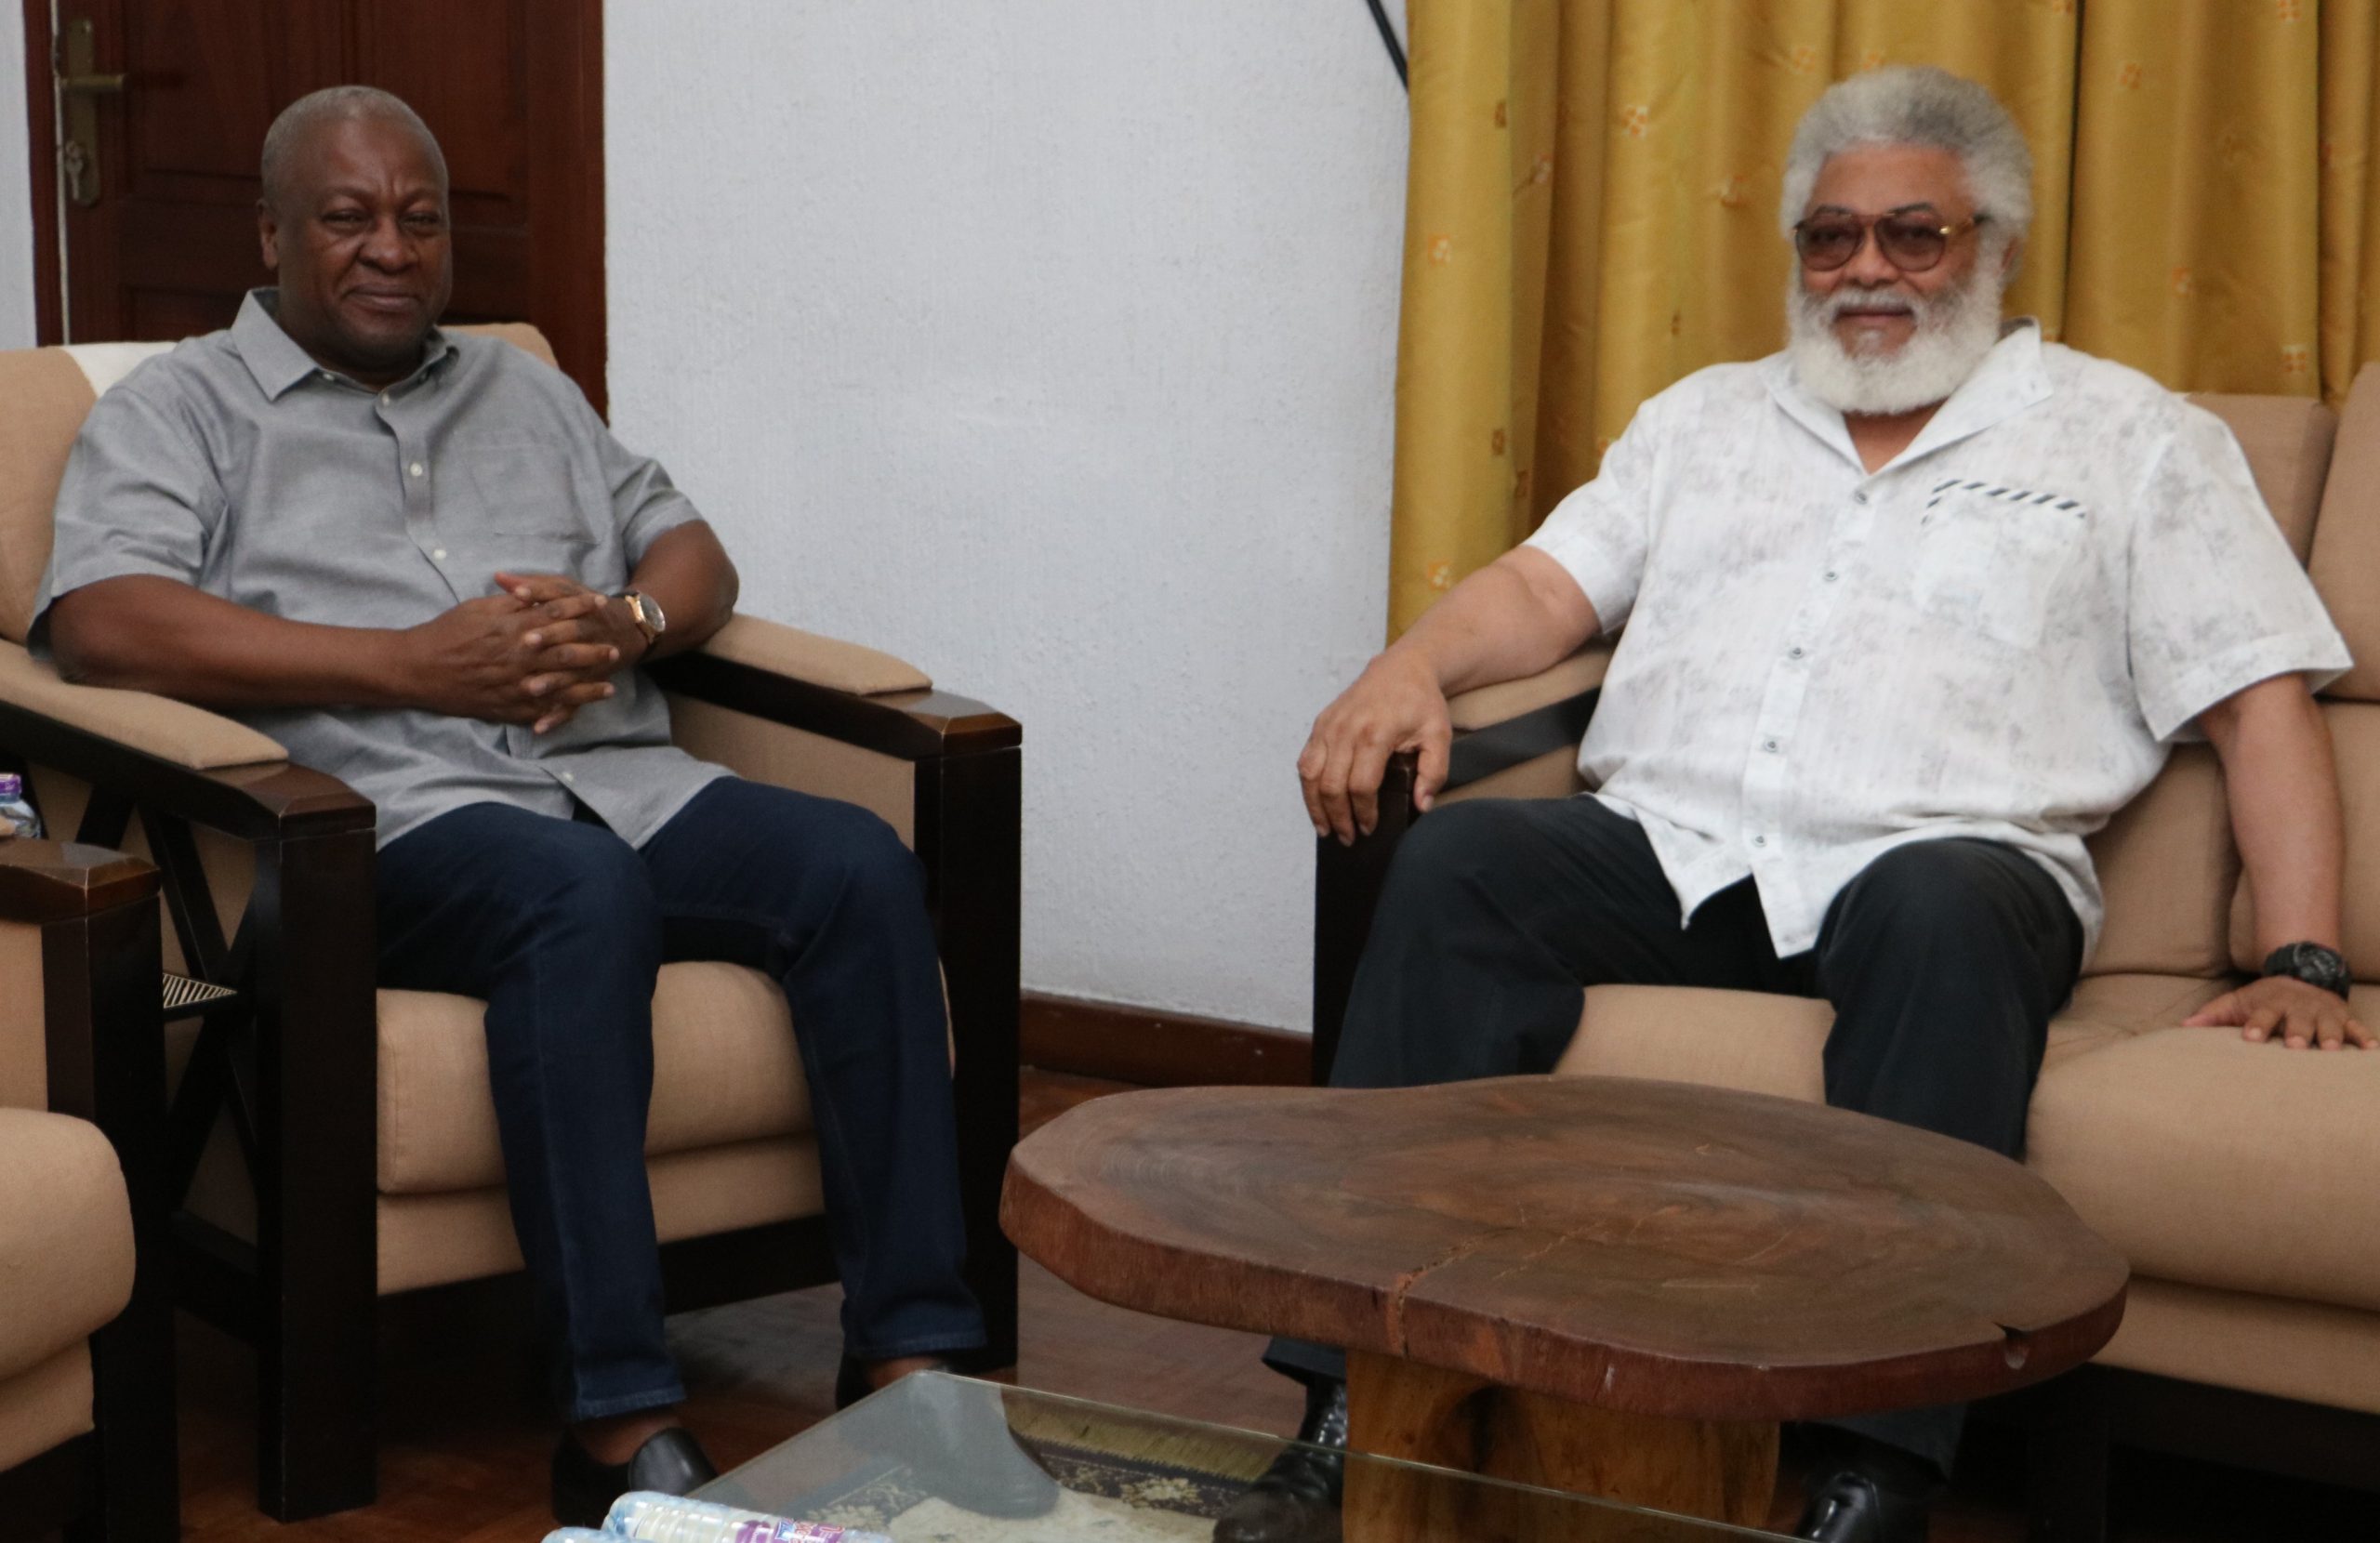 NDC Flagbearer, Mahama meets former President Rawlings to discuss party issues